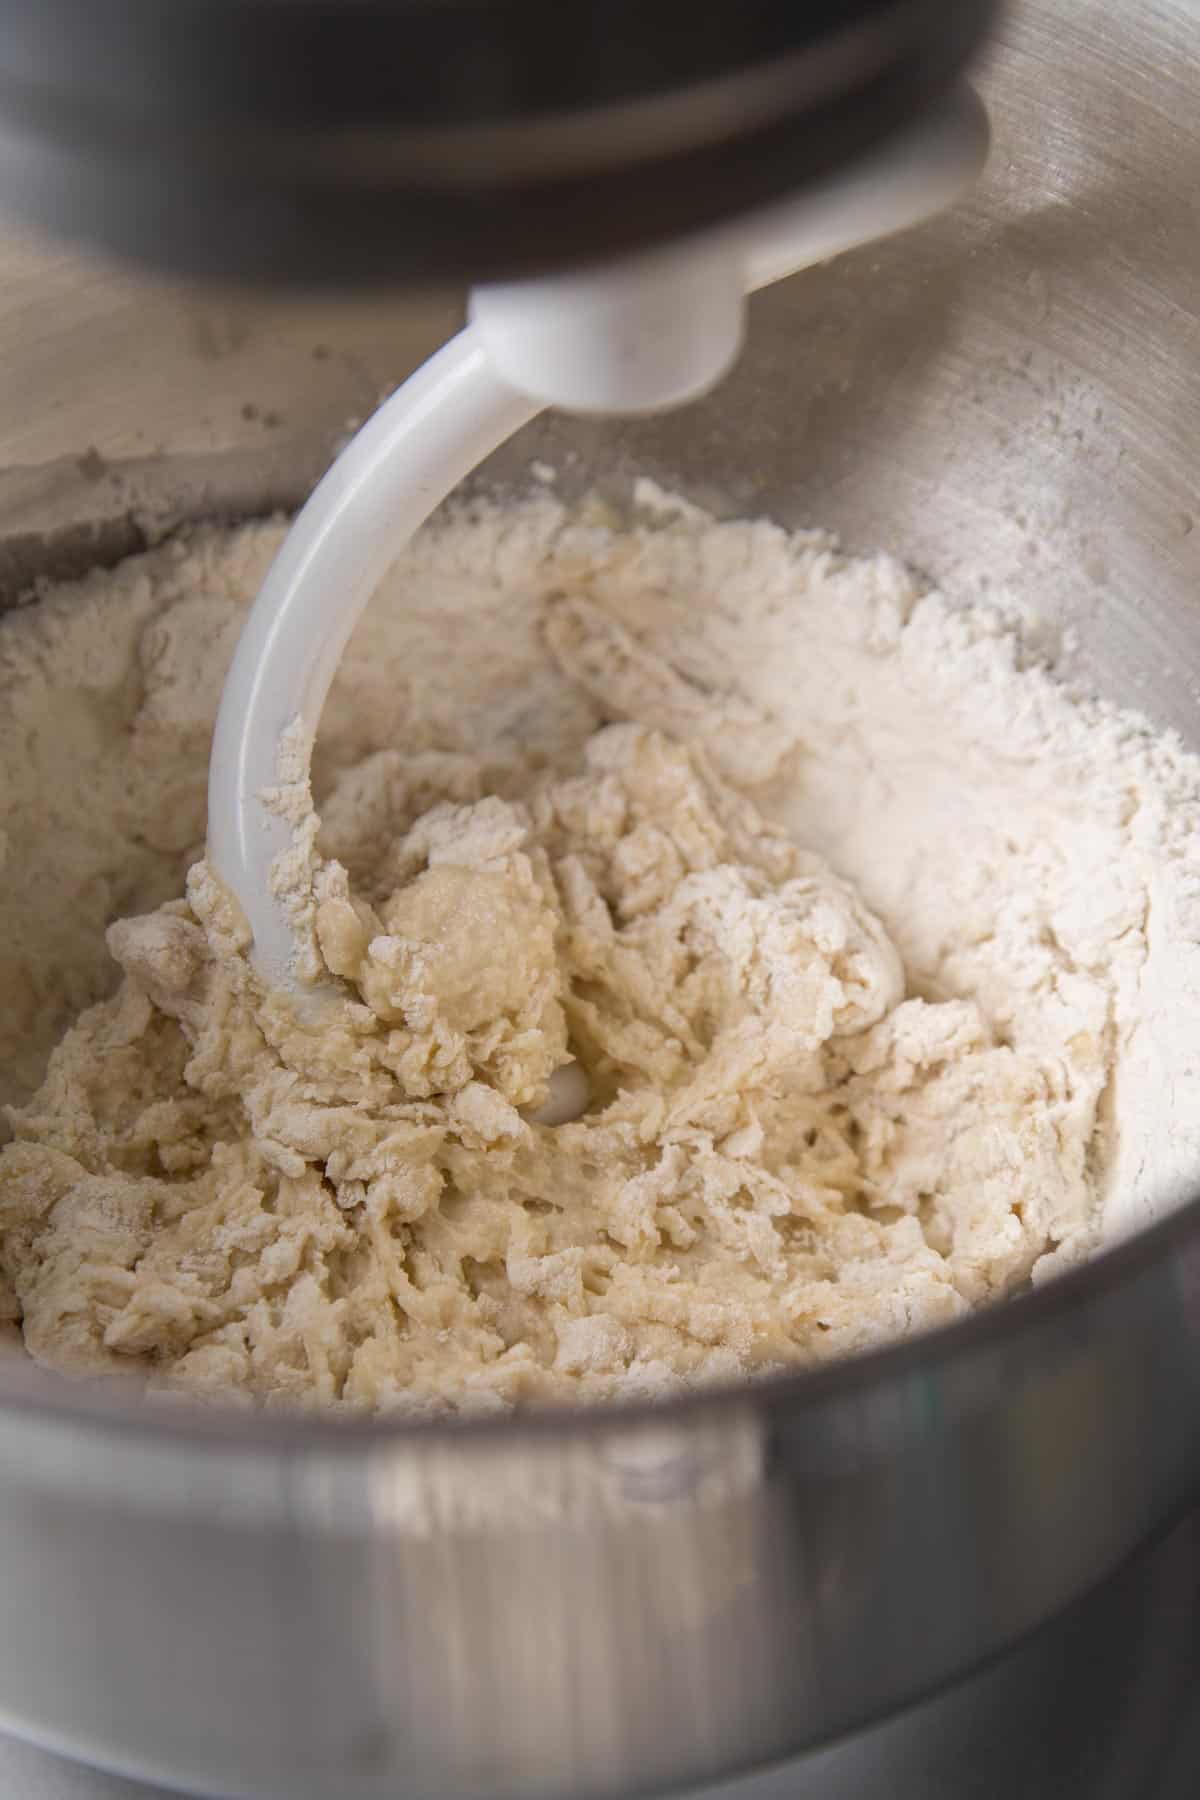 yeast dough mixed together using dough hook in stand mixer.